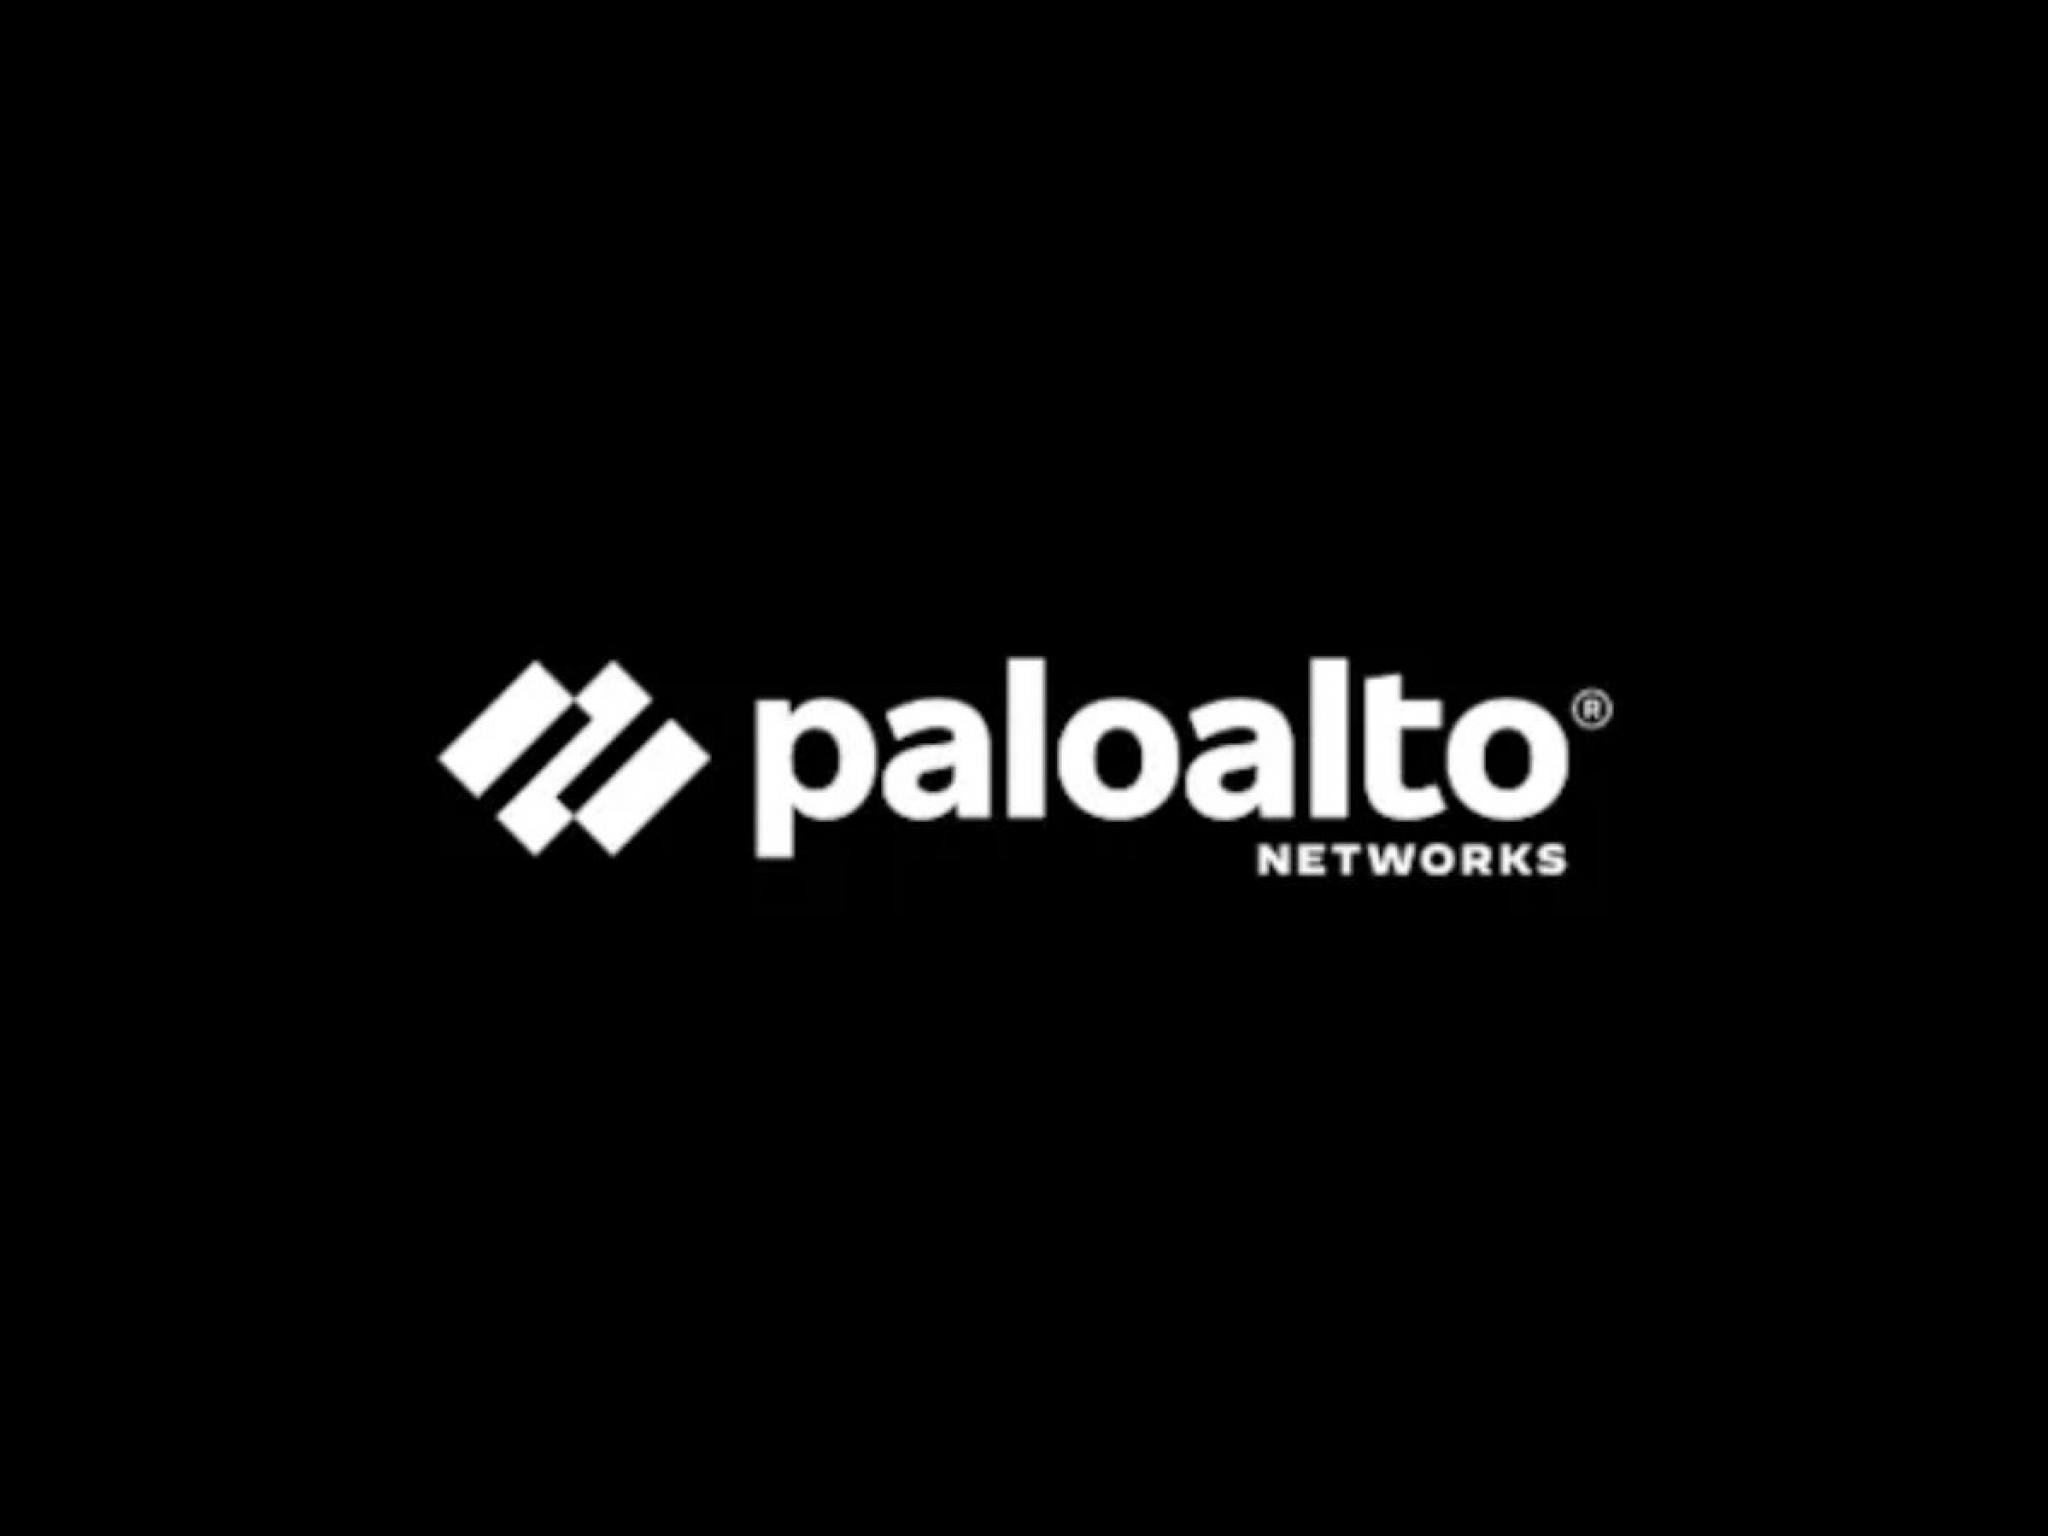  why-palo-alto-networks-shares-are-trading-lower-by-around-5-here-are-20-stocks-moving-premarket 